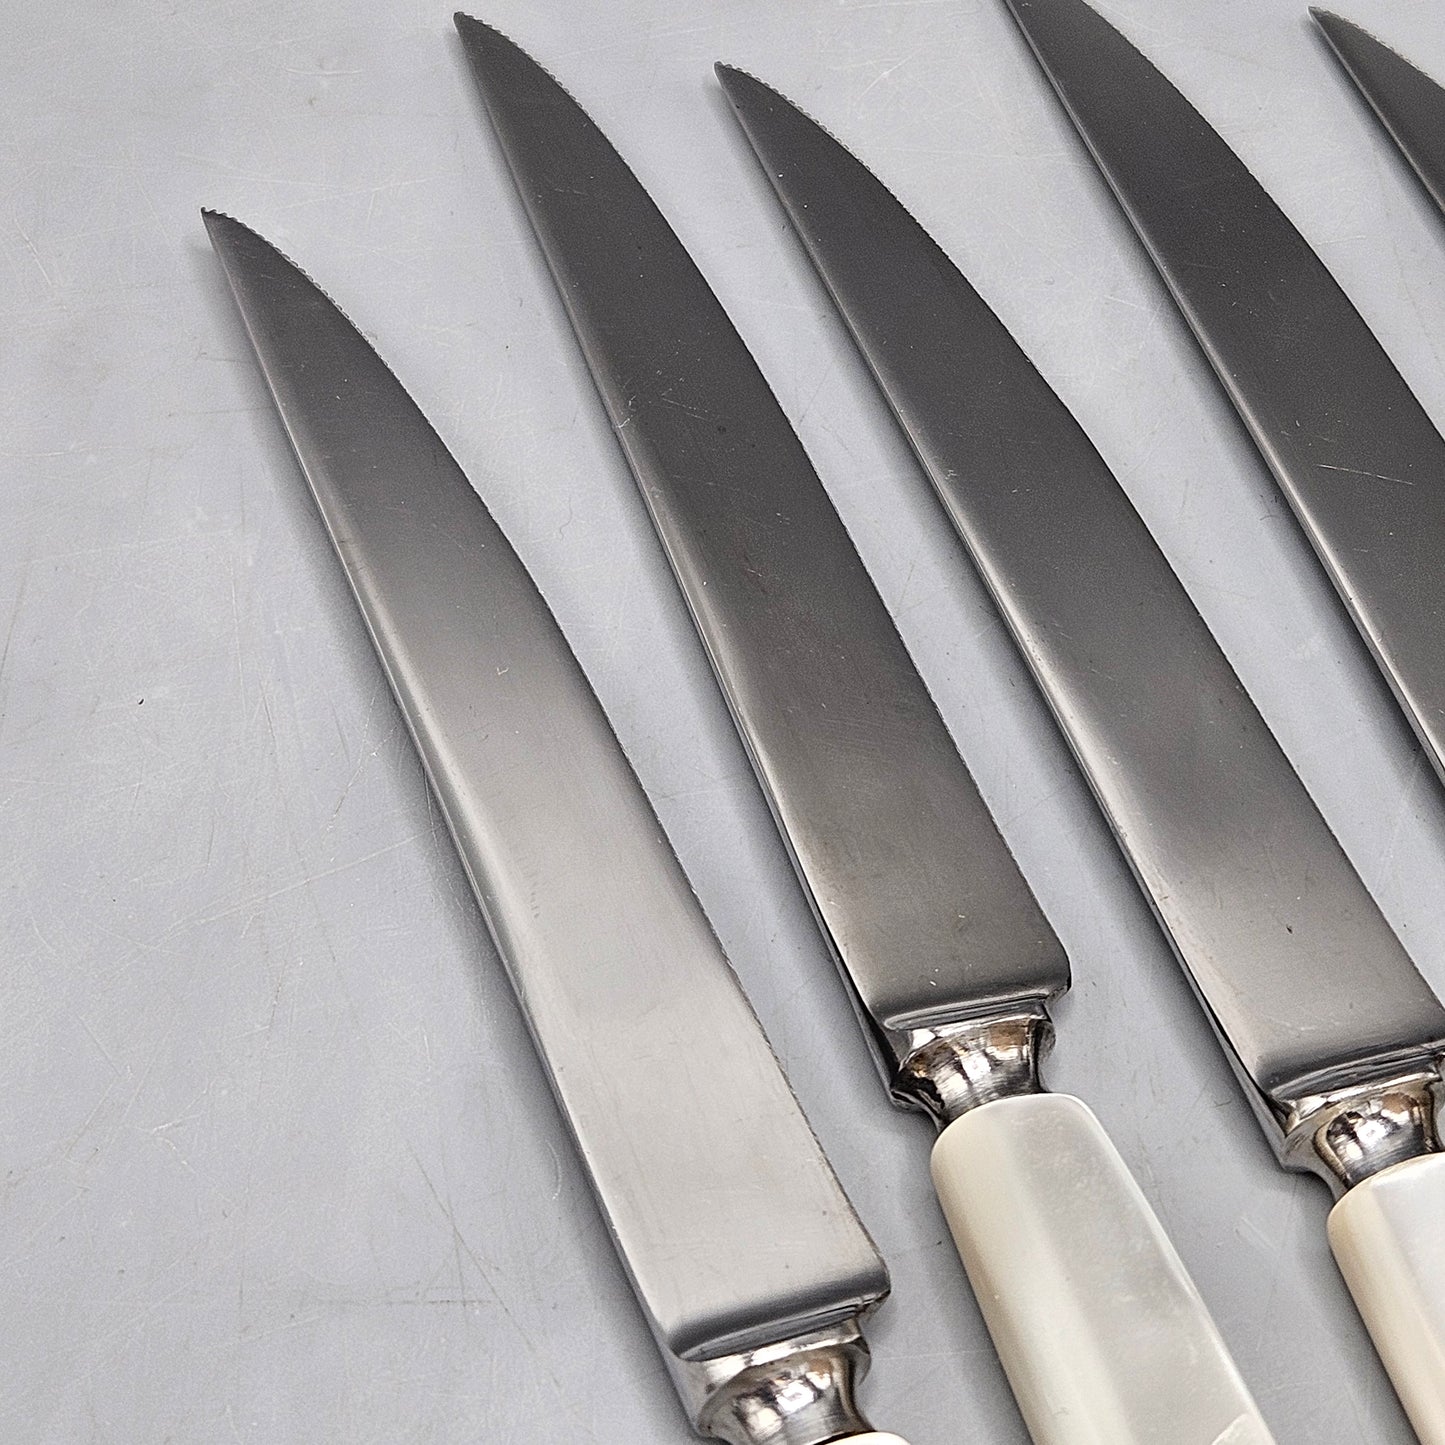 Vintage Set of 6 Hull Stainless Steel Steak Knives with Mother of Pearl Handles